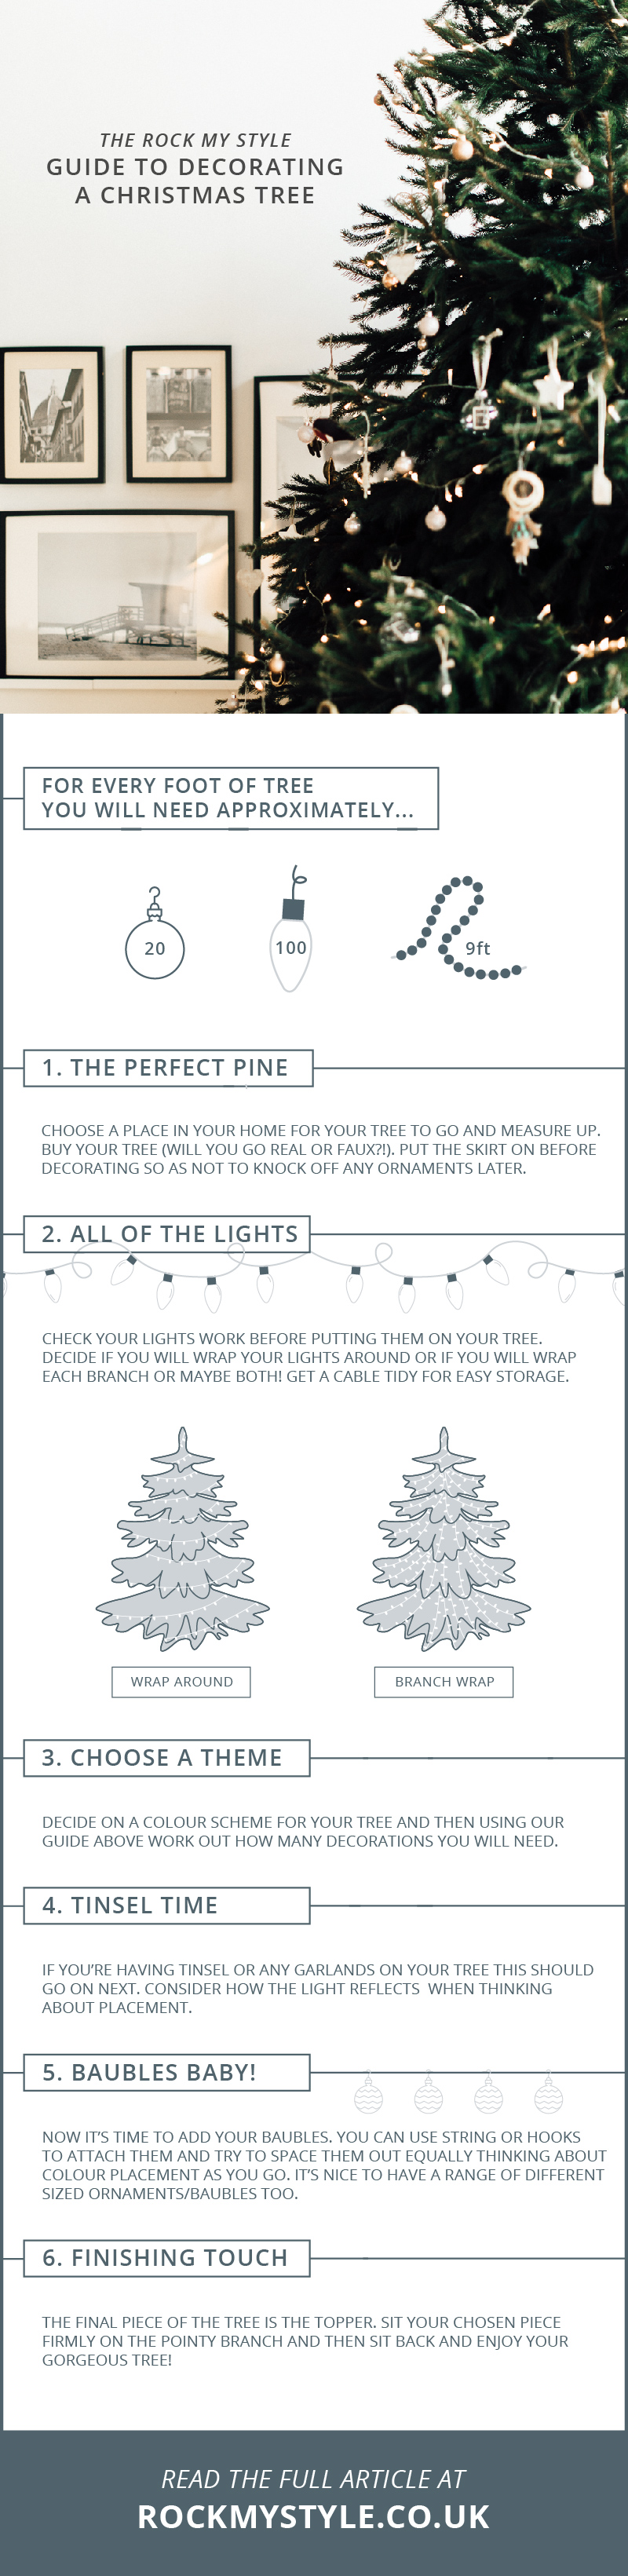 The Rock My Style Guide to Decorating A Christmas Tree